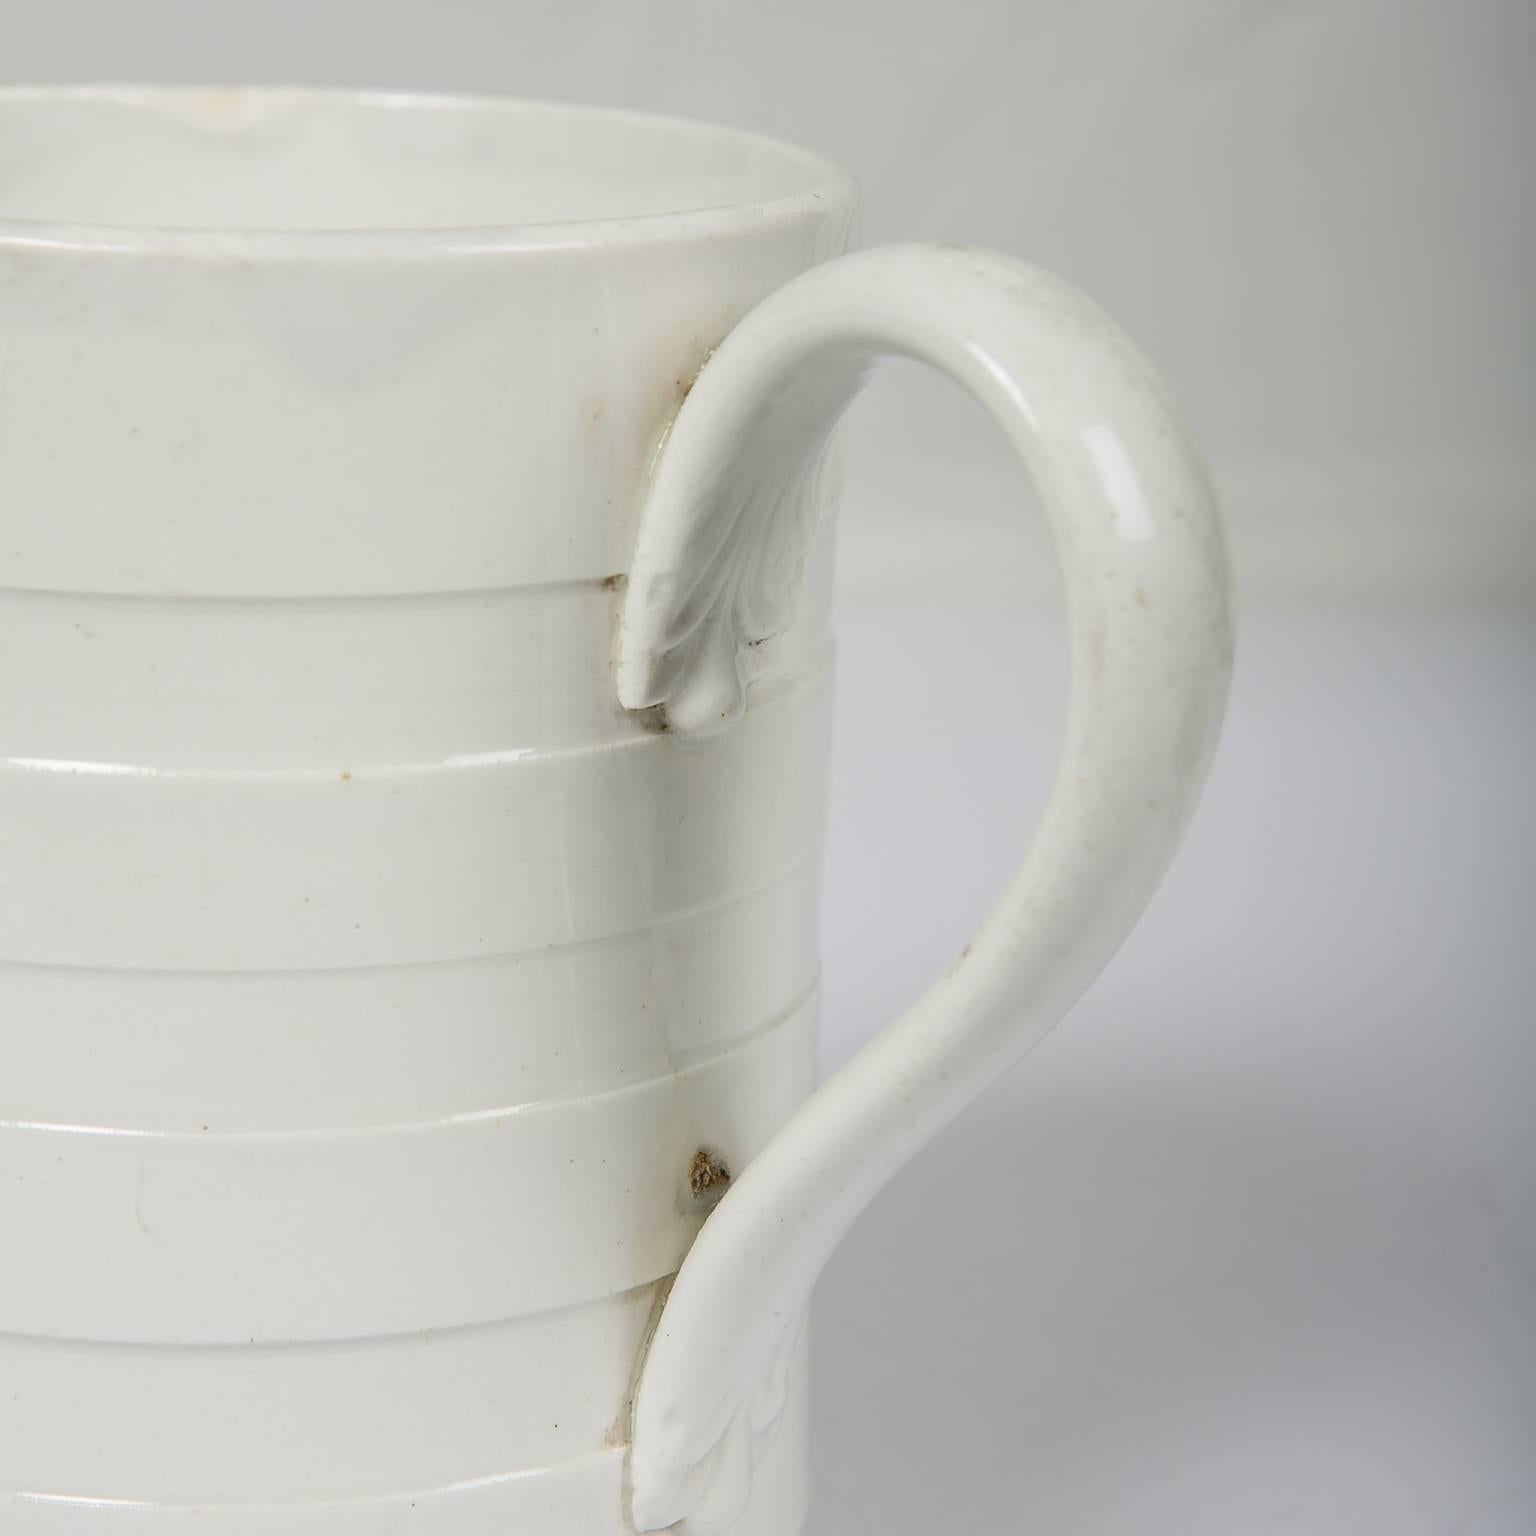 An early 19th century English creamware mug, machine turned on a lathe with indented bands.
The strap handle has traditional foliate terminals. The form is simple and classic in shape.
Today it would look great used either for flowers, or on a desk